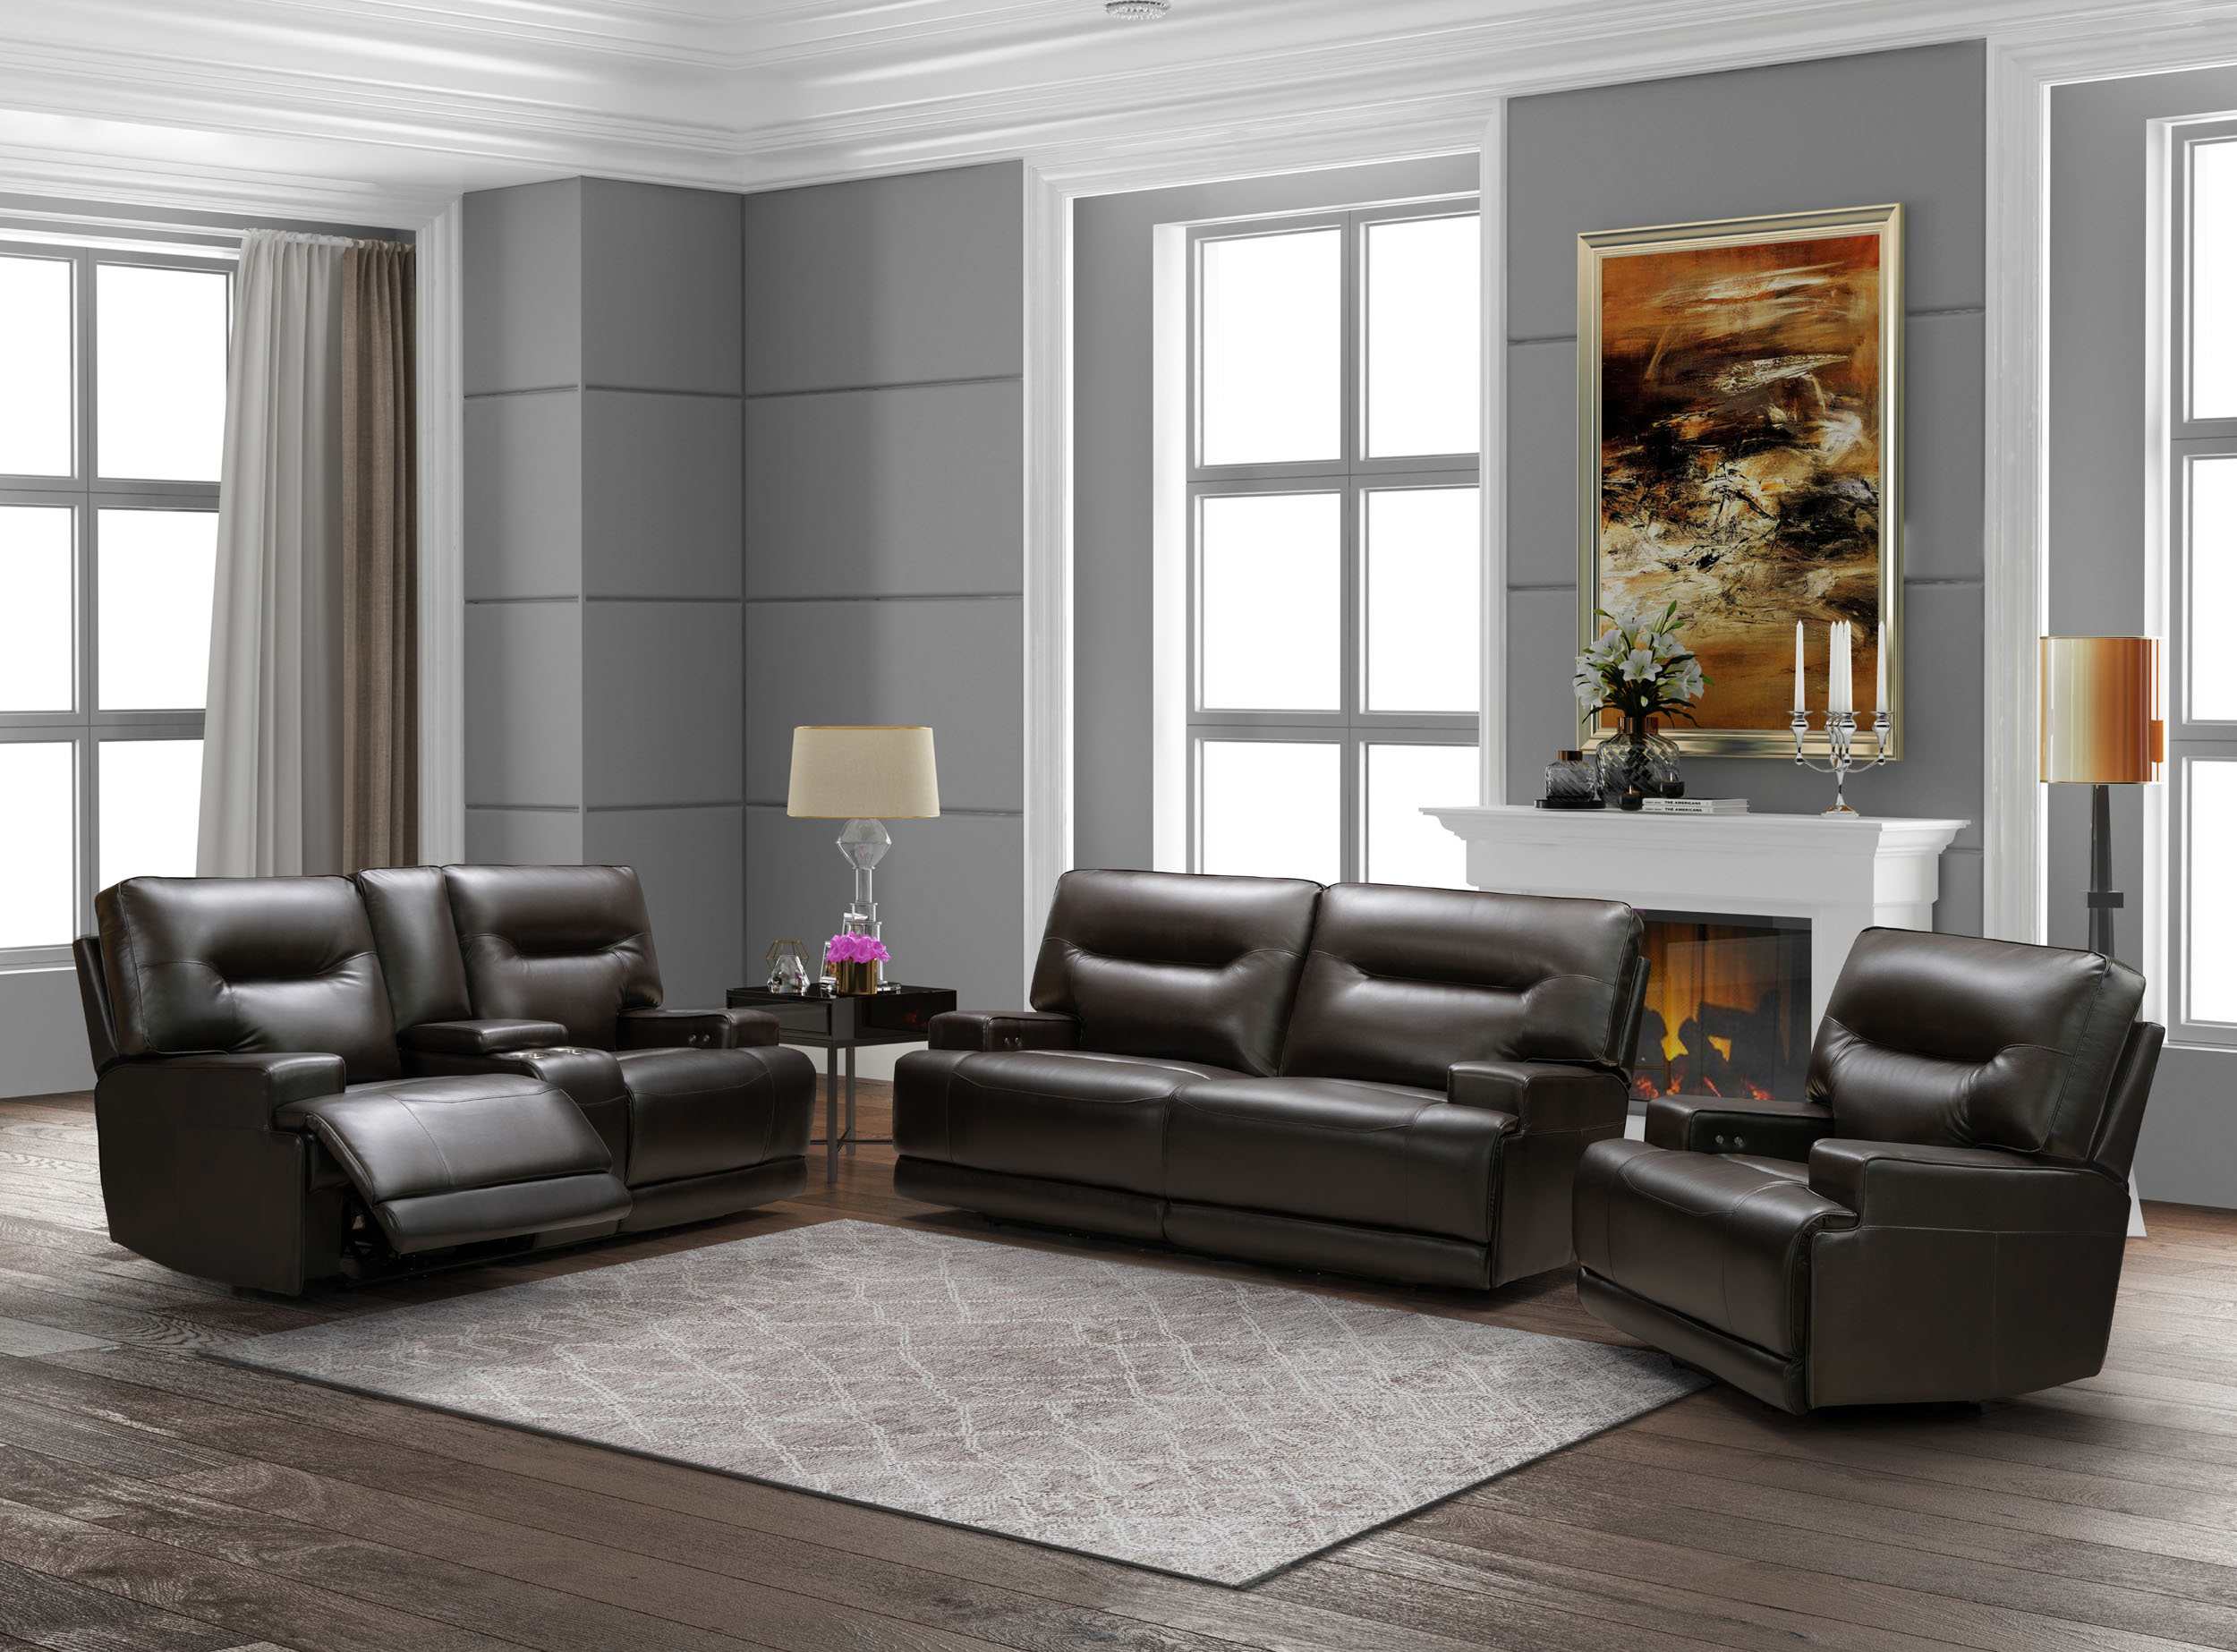 LRPX2900 Chocolate Power Motion Sofa, Loveseat and Chair Living Room Set Set